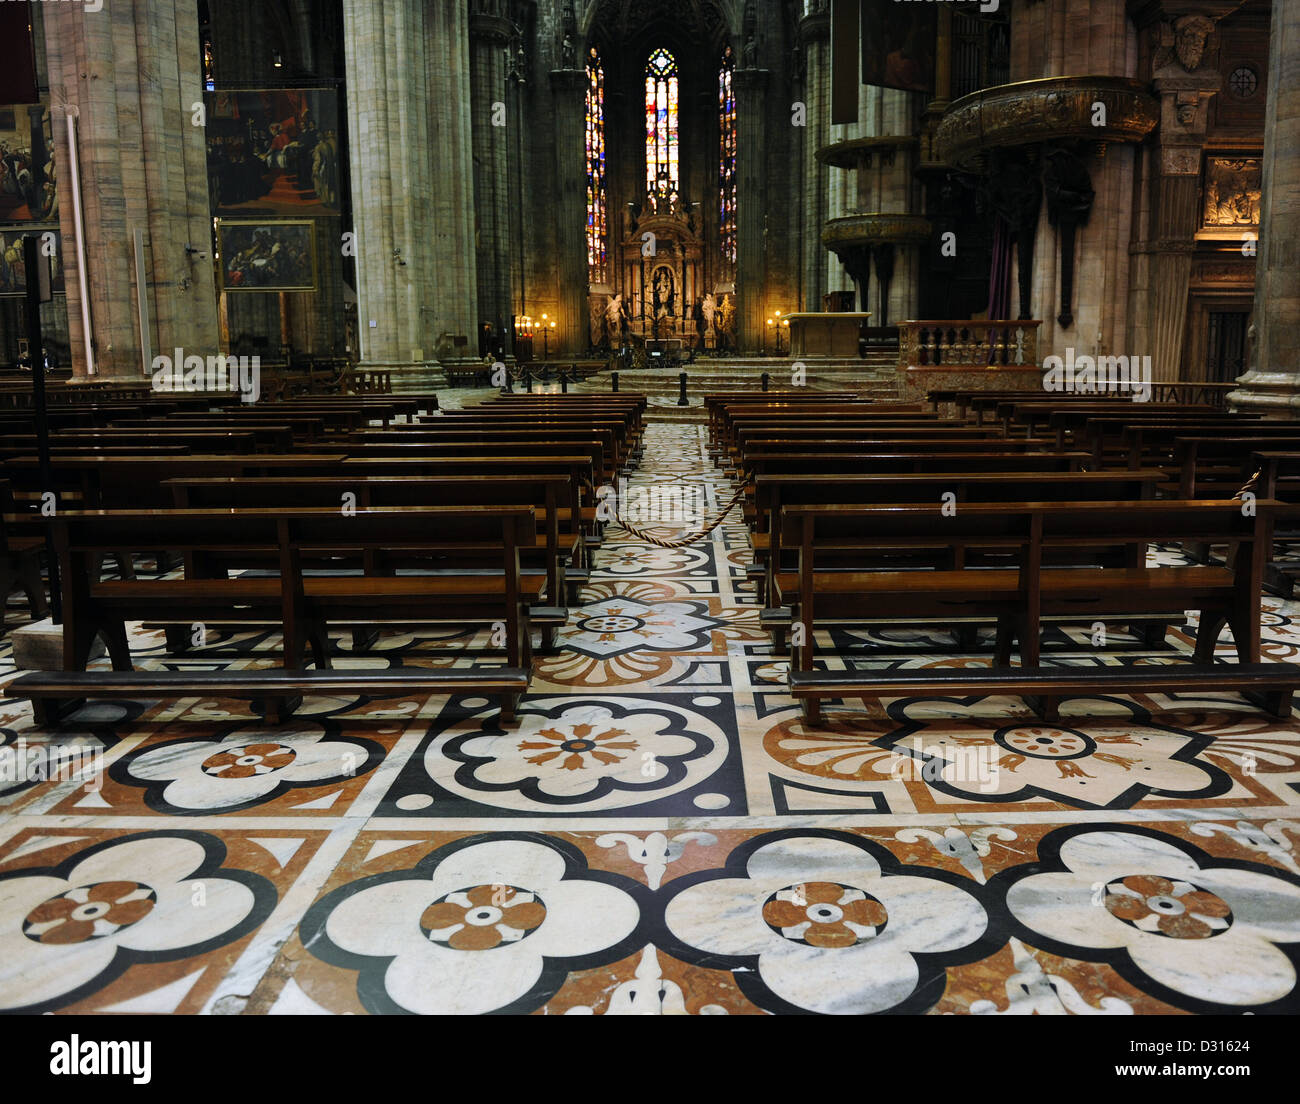 Italy. Milan. Cathedral. Gothic style. Polychromed marble mosaics decorating the pavement inside the temple. Stock Photo